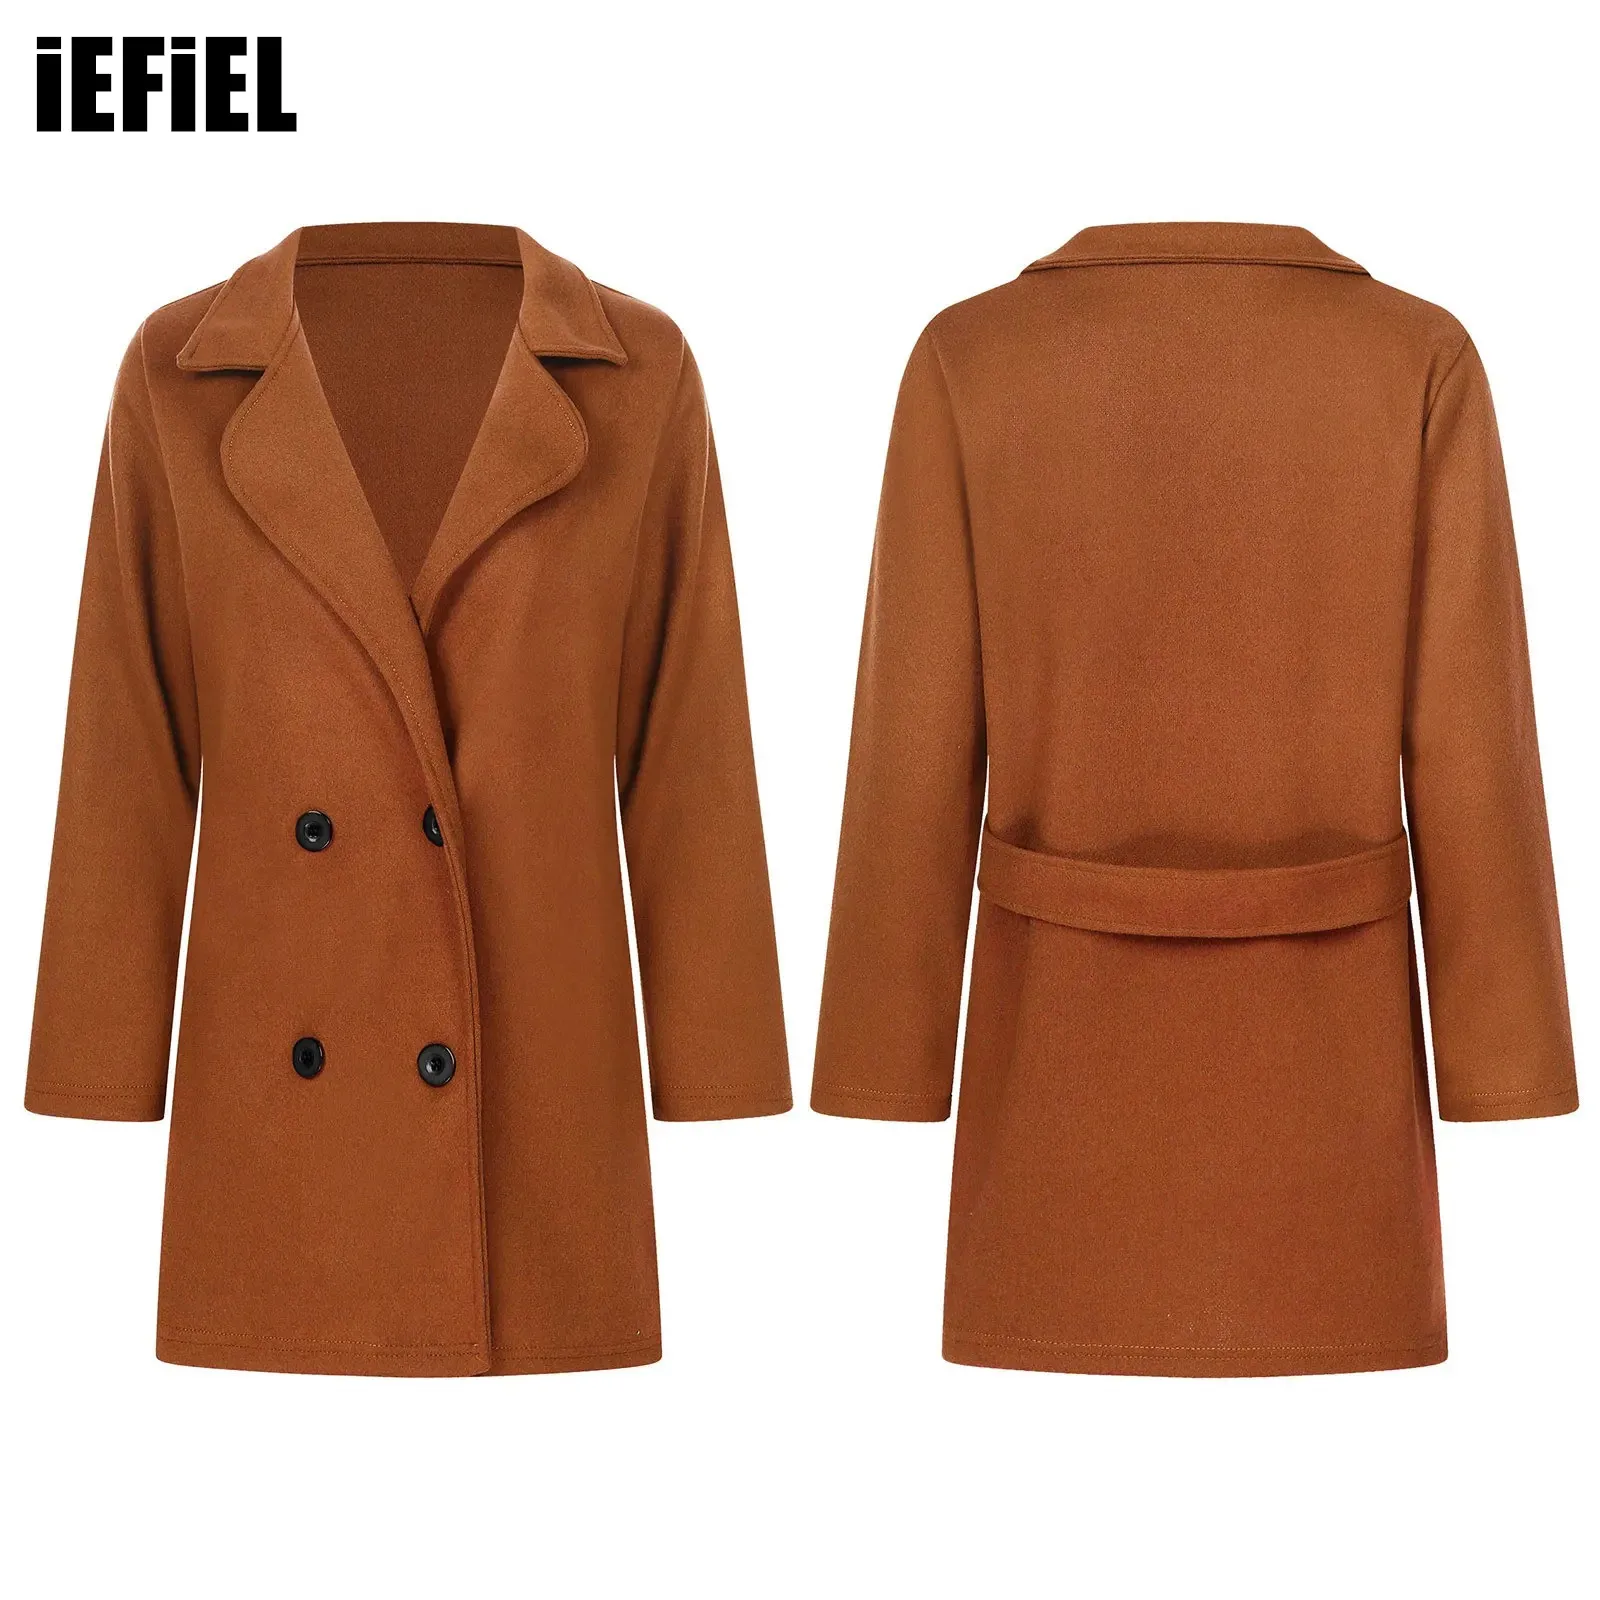 

Womens Fleece Jackets Notch Lapel Long Sleeve Solid Color Double-Breasted Overcoat Outerwear Casual Trench Coat